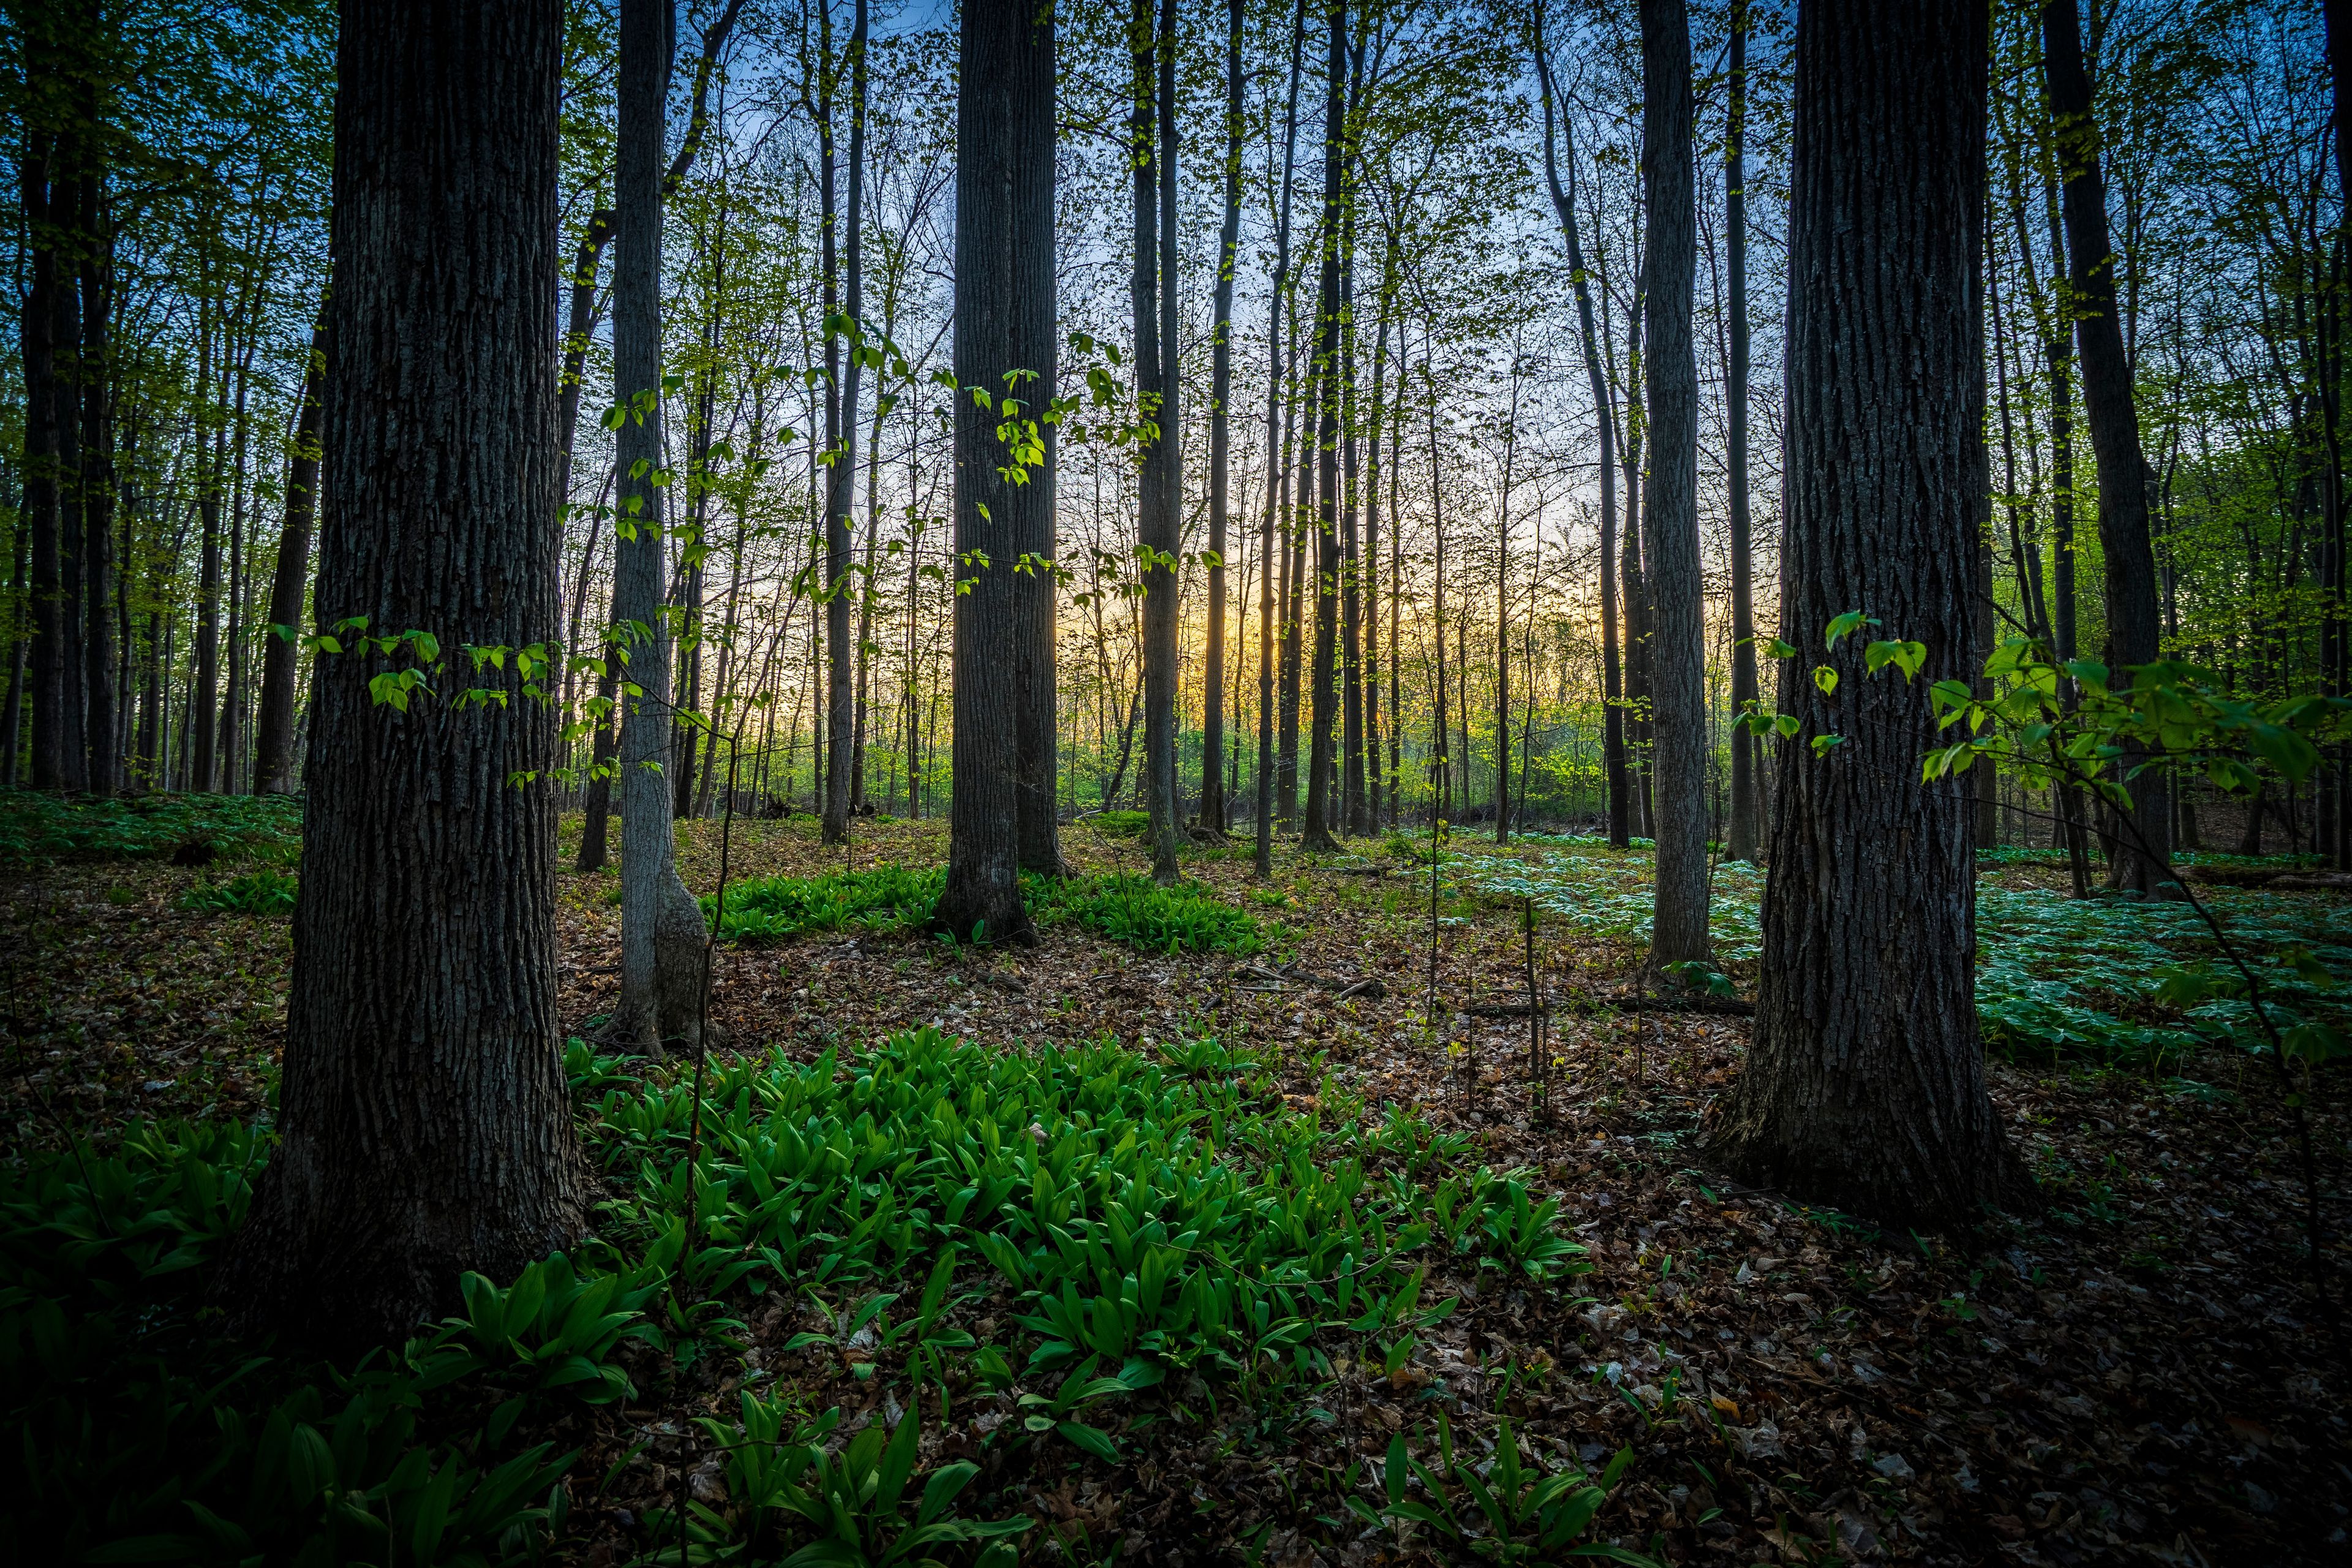 The trees in the Sacred Grove at sunset.